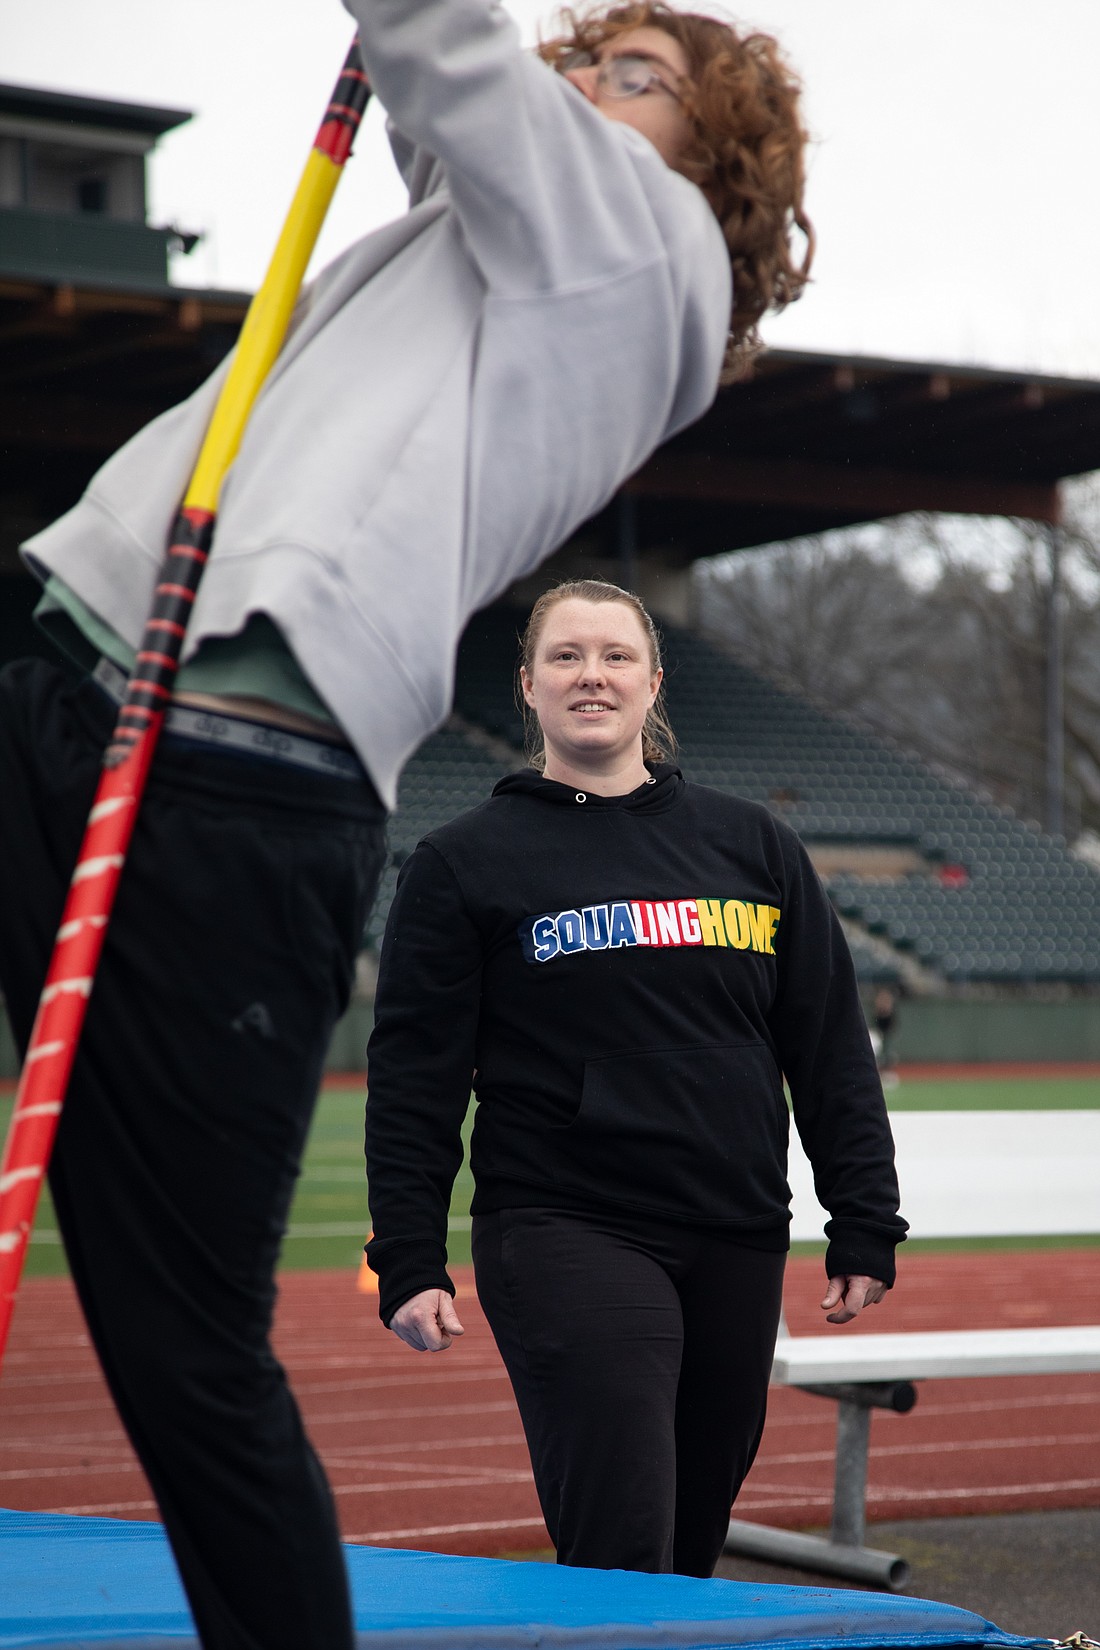 Dressed in her "SquaLingHome" sweatshirt, Morgan Annable coaches pole vaulting to students from three Bellingham high schools on March 20 at Civic Stadium. Annable is a former athlete and pole vaulter at Western Washington University and now works at Squalicum High School.